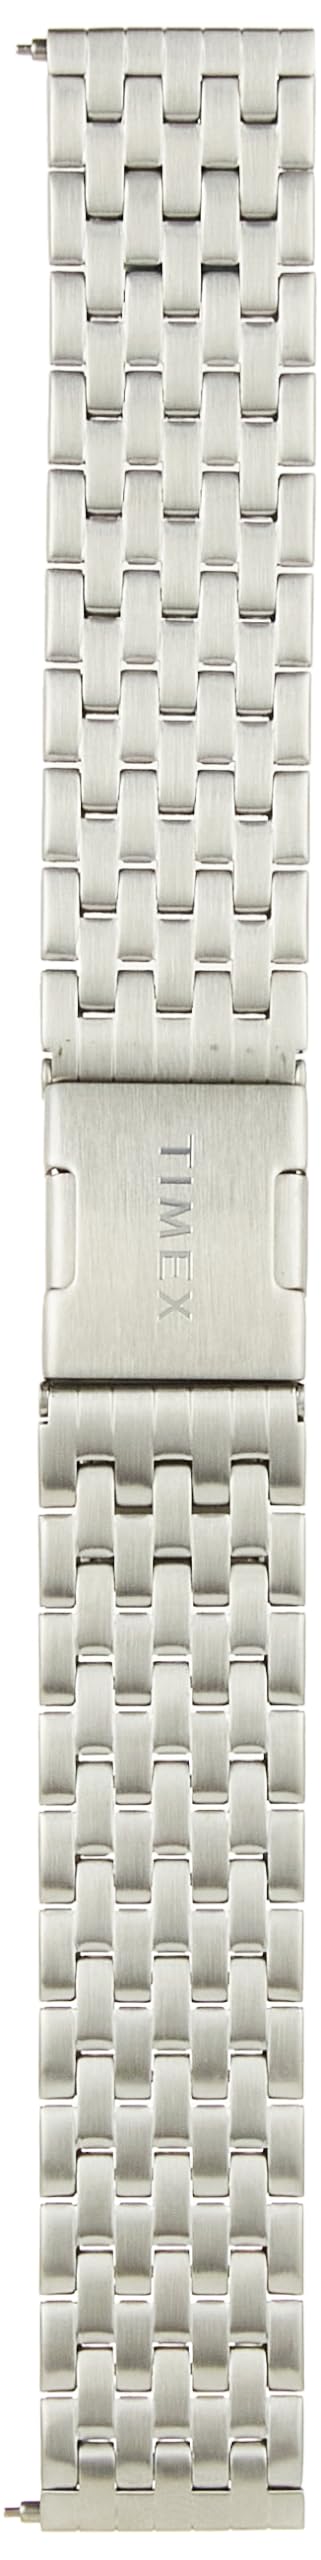 Timex 20mm Stainless Steel Quick-Release Bracelet - Silver-Tone with Deployment Clasp